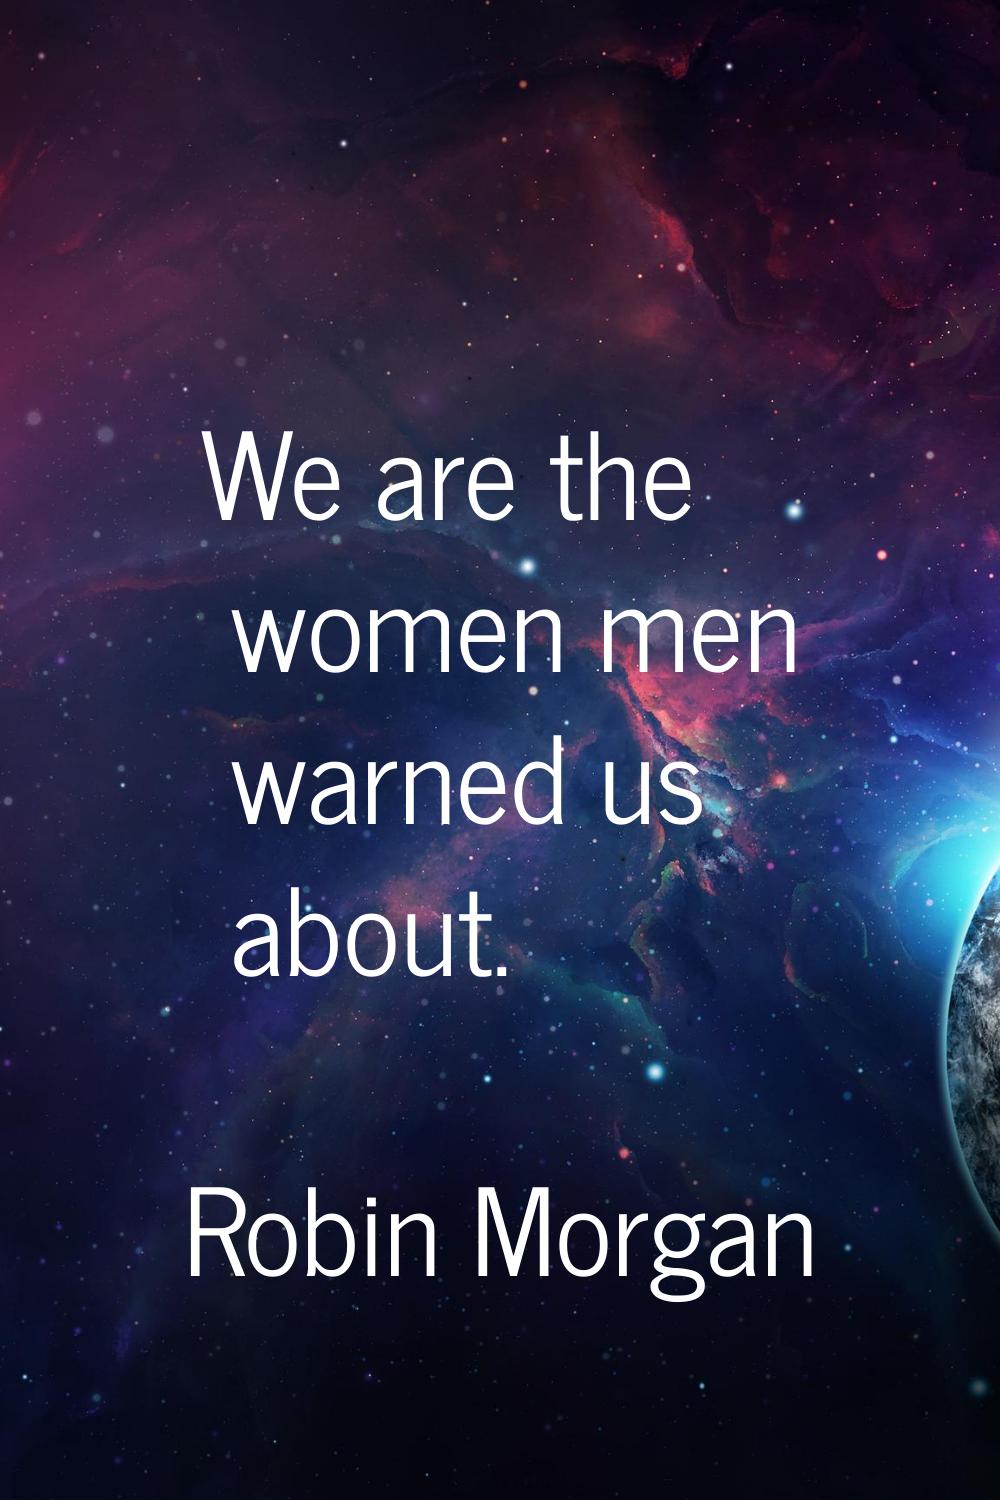 We are the women men warned us about.